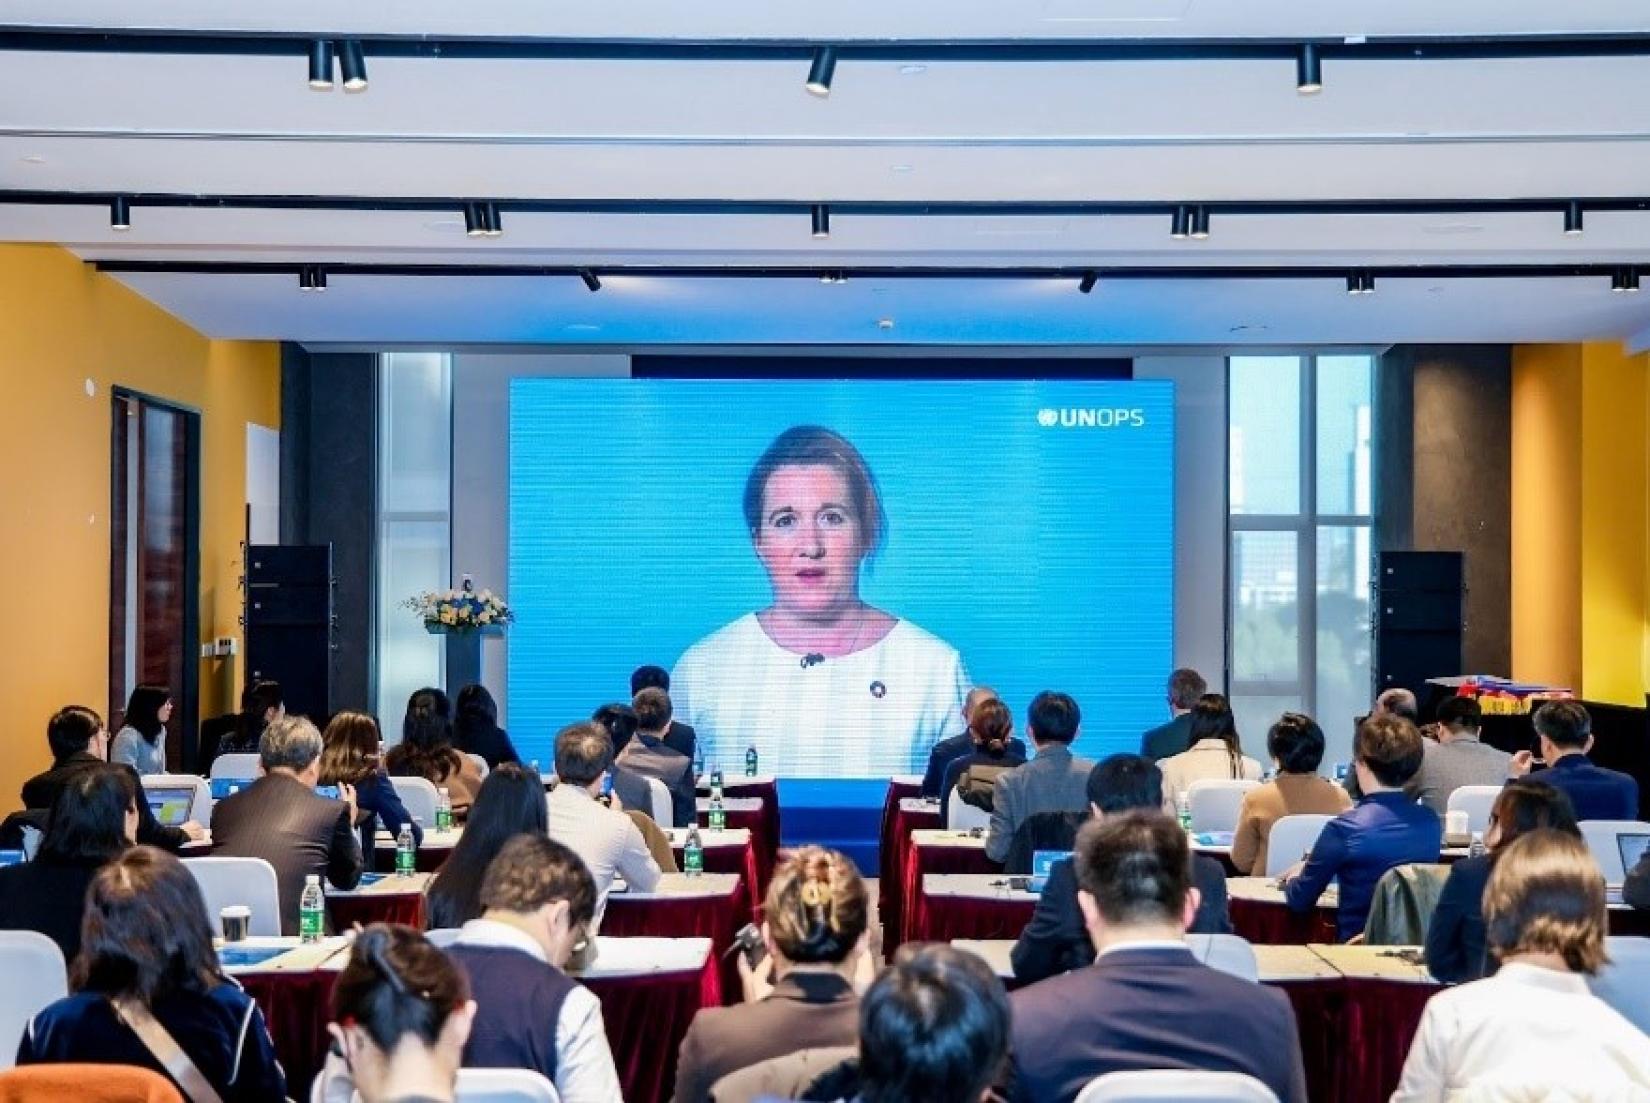 Ms. Anne-Claire Howard, Director of the UNOPS Procurement Group, delivered a video message